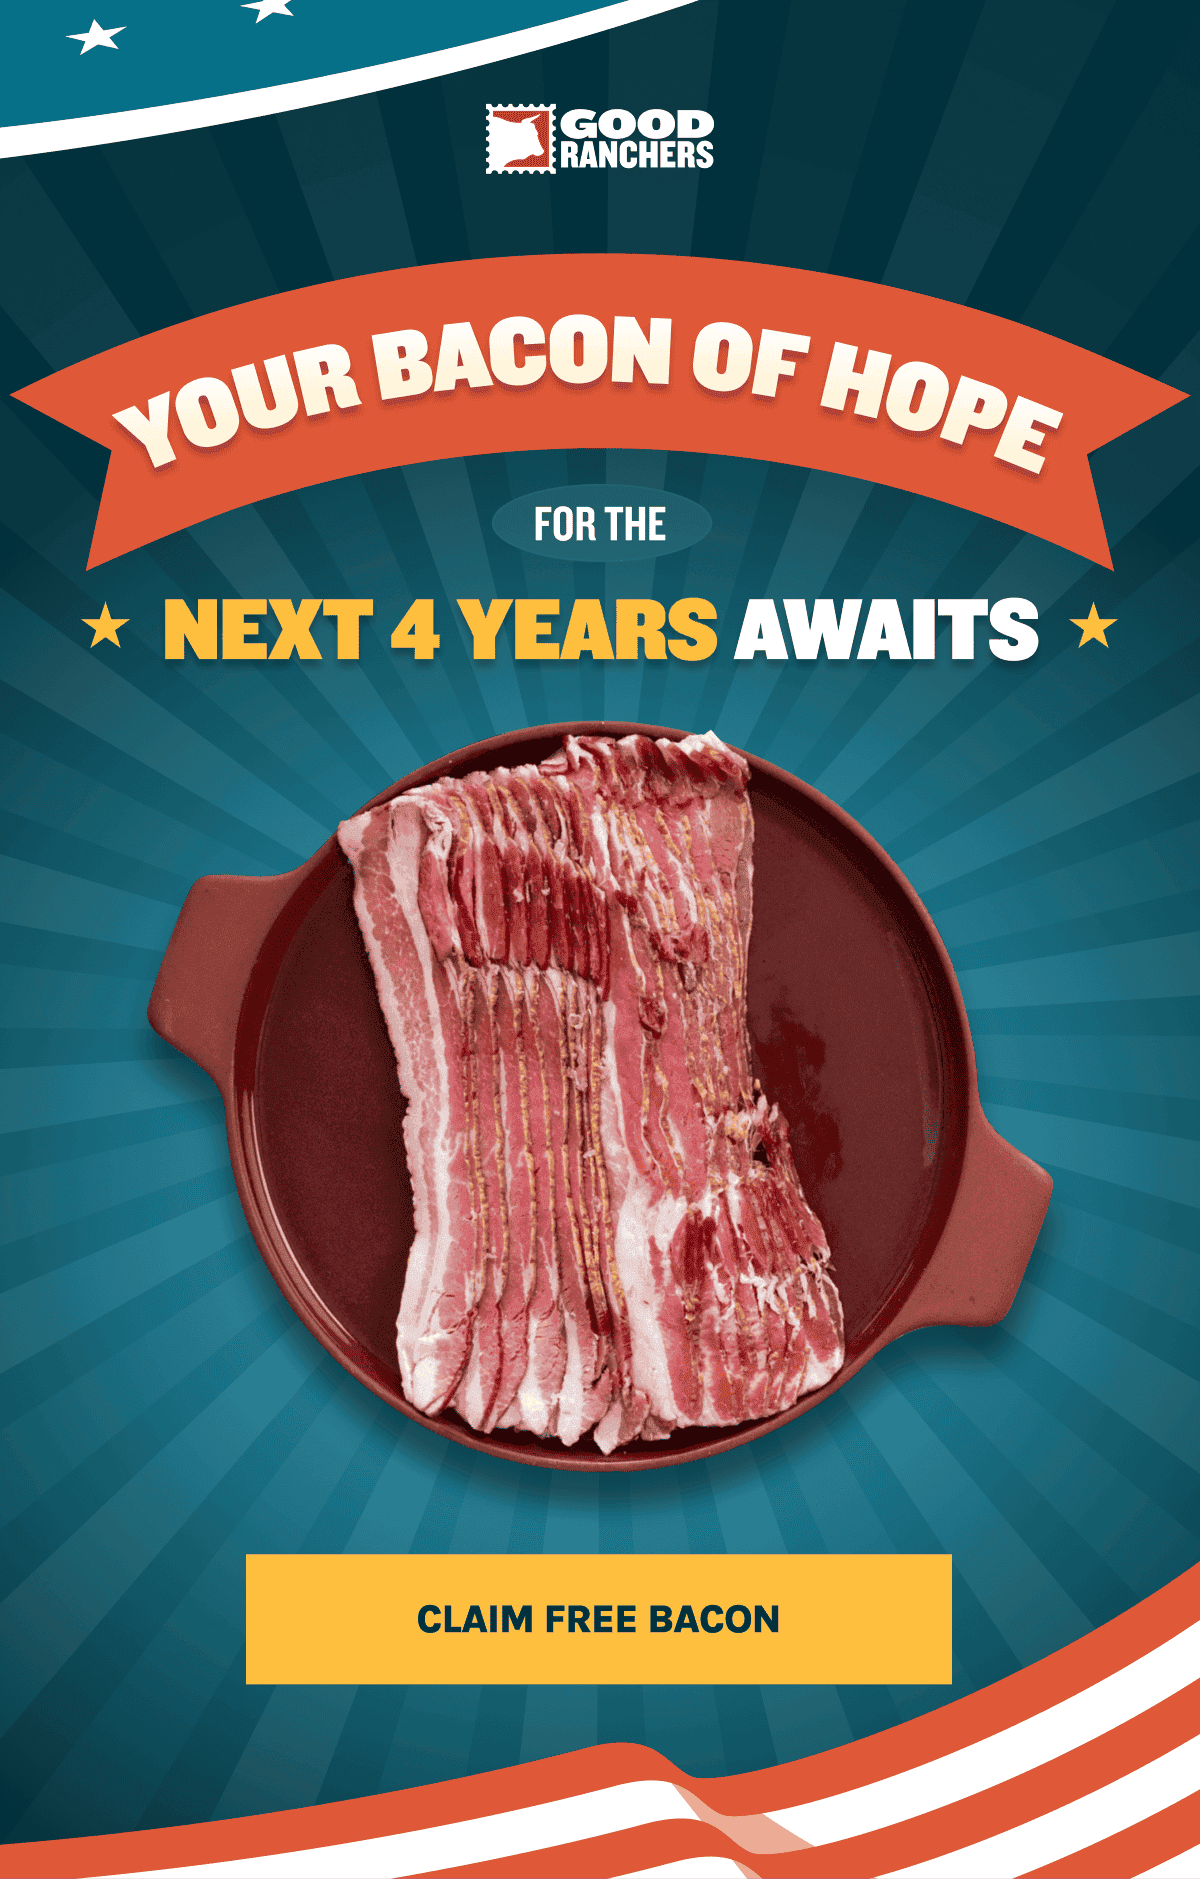 Subscribe to any Good Ranchers box to redeem FREE Bacon for 4 years!